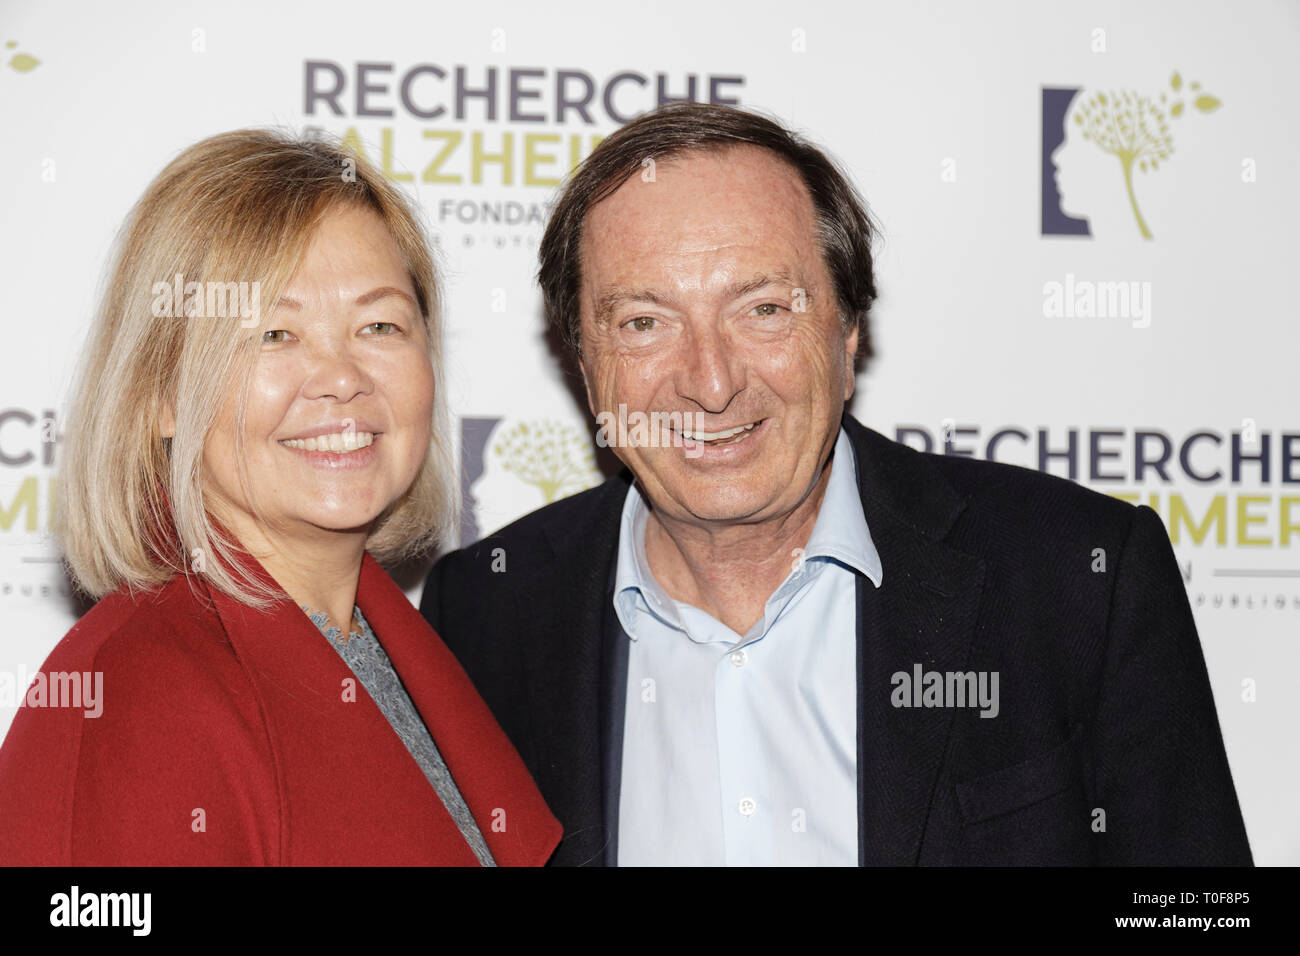 Paris, France. 18th Mar 2019. Michel Edouard Leclerc and Natalia Olzoeva - Photocall of the 14th Gala 2019 of the Association for Alzheimer Research at the Olympia in Paris on March 18, 2019, France Credit: Véronique PHITOUSSI/Alamy Live News Stock Photo